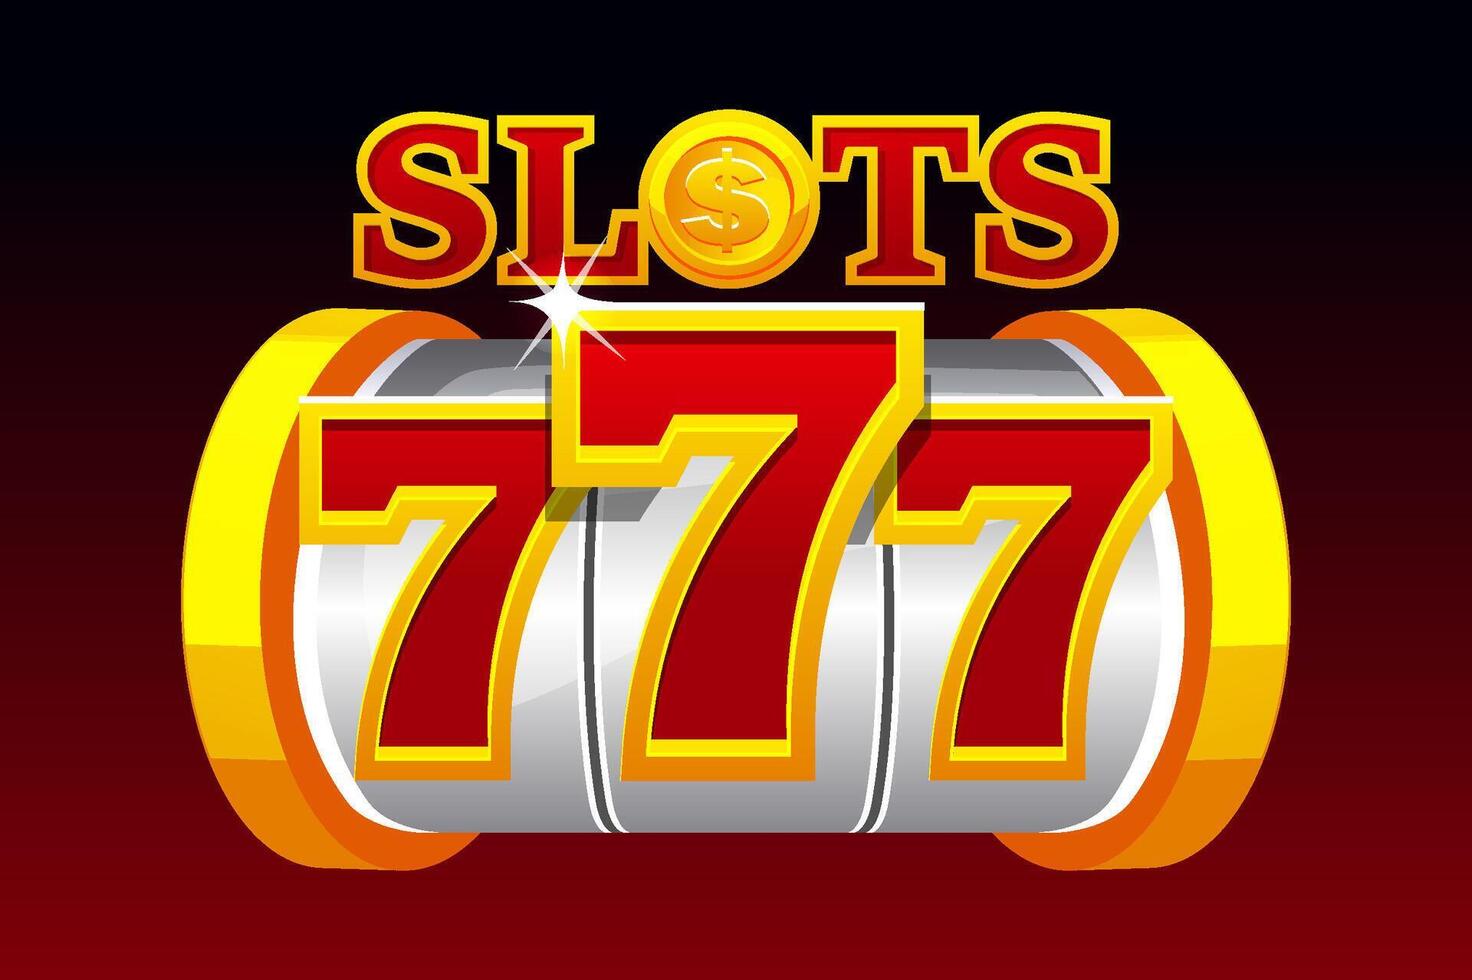 Slot machine 777. Golden and red Banner for a casino game. vector